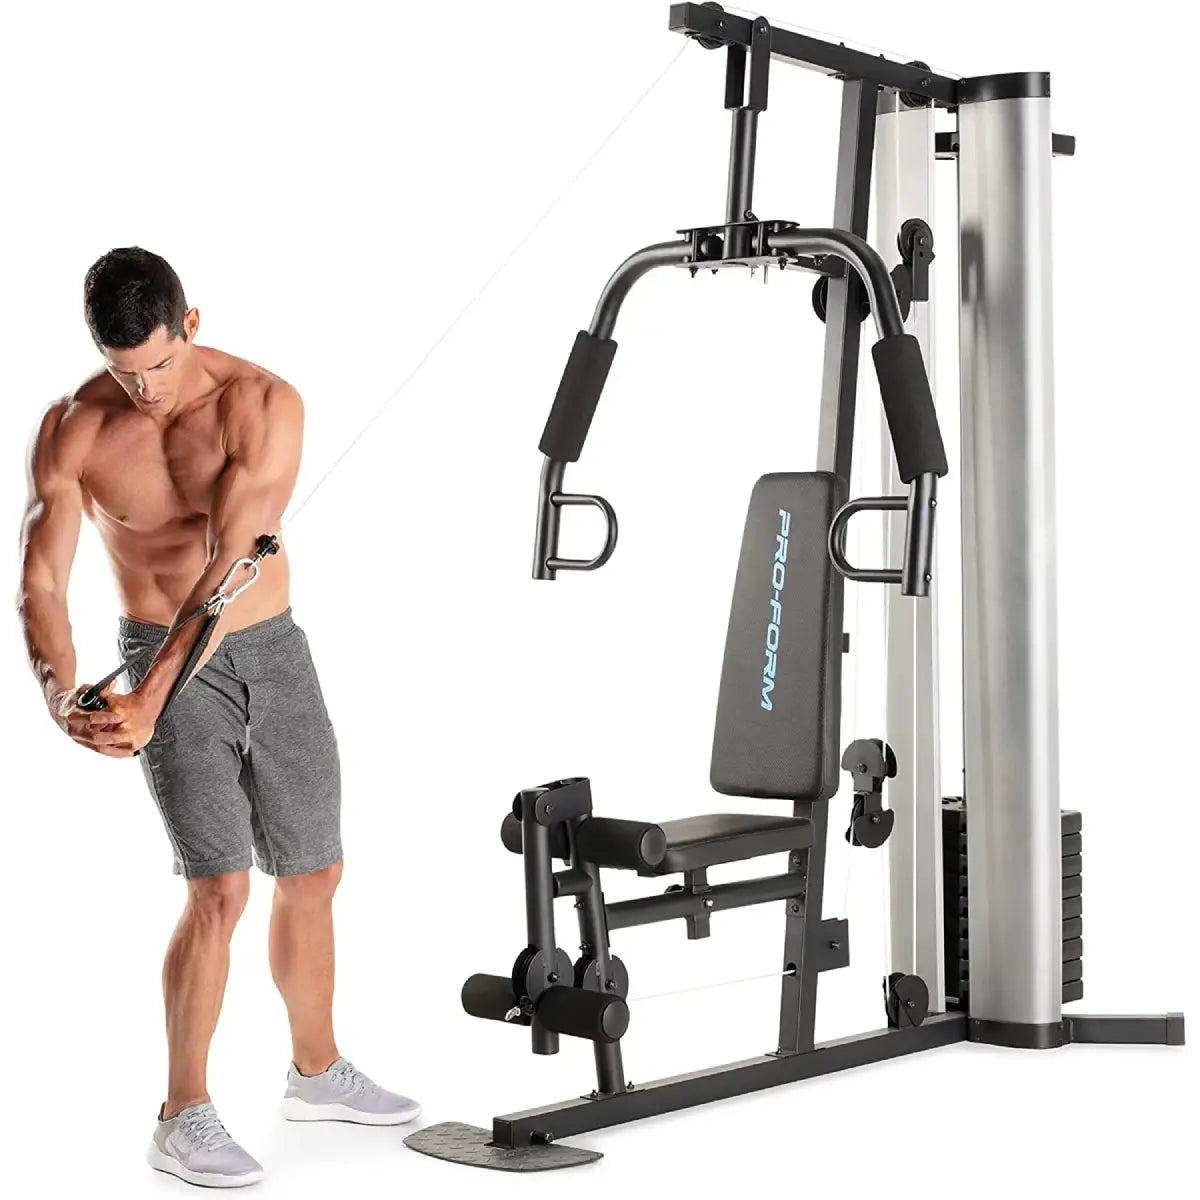 ProForm - Carbon Strength Multi-Station – The Treadmill Factory